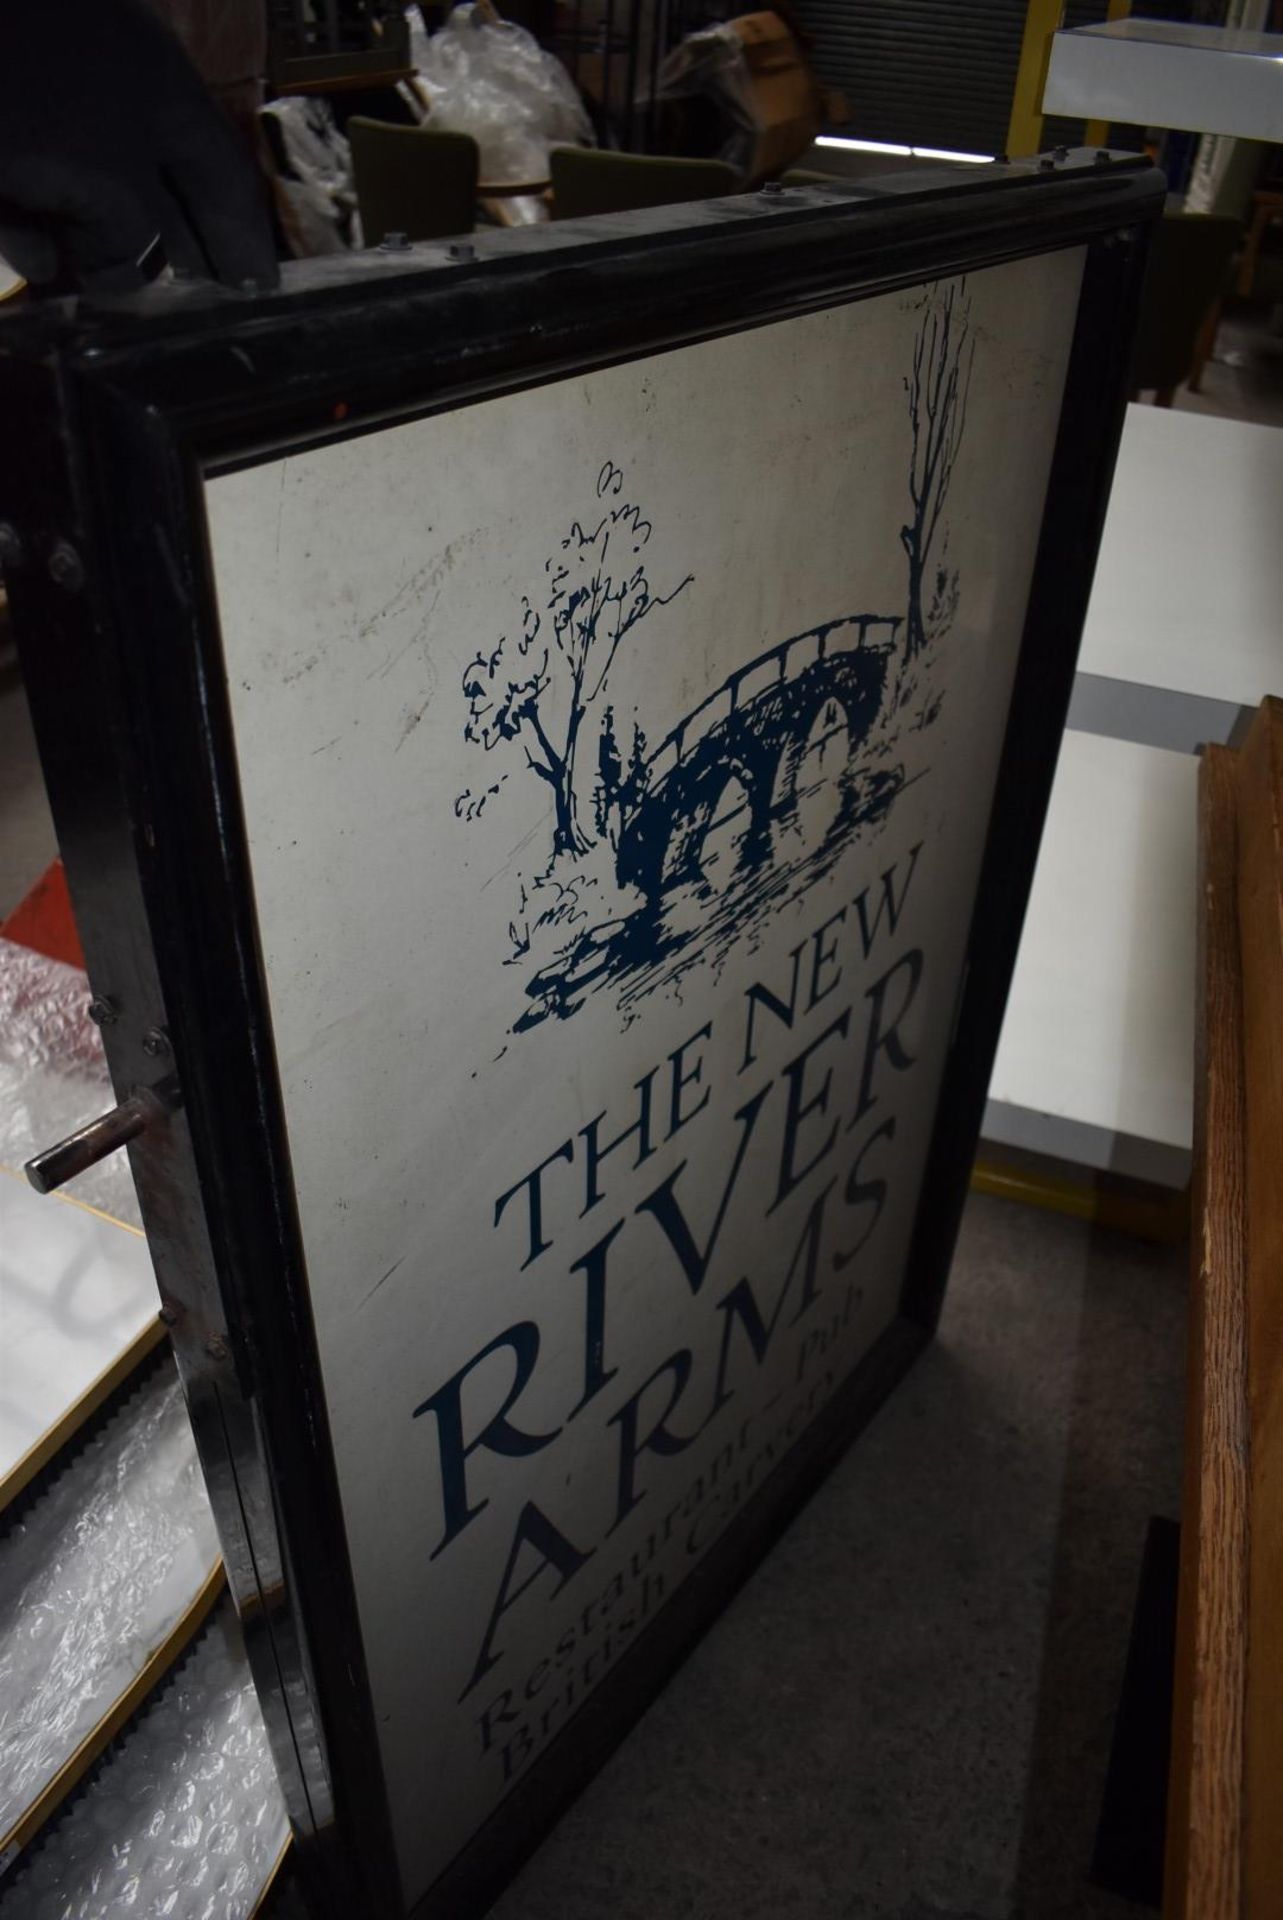 1 x Large Pub Sign - The New River Arms - Dimensions: 93 x 125 cms - Ref: JP917 GITW - CL011 - - Image 2 of 5